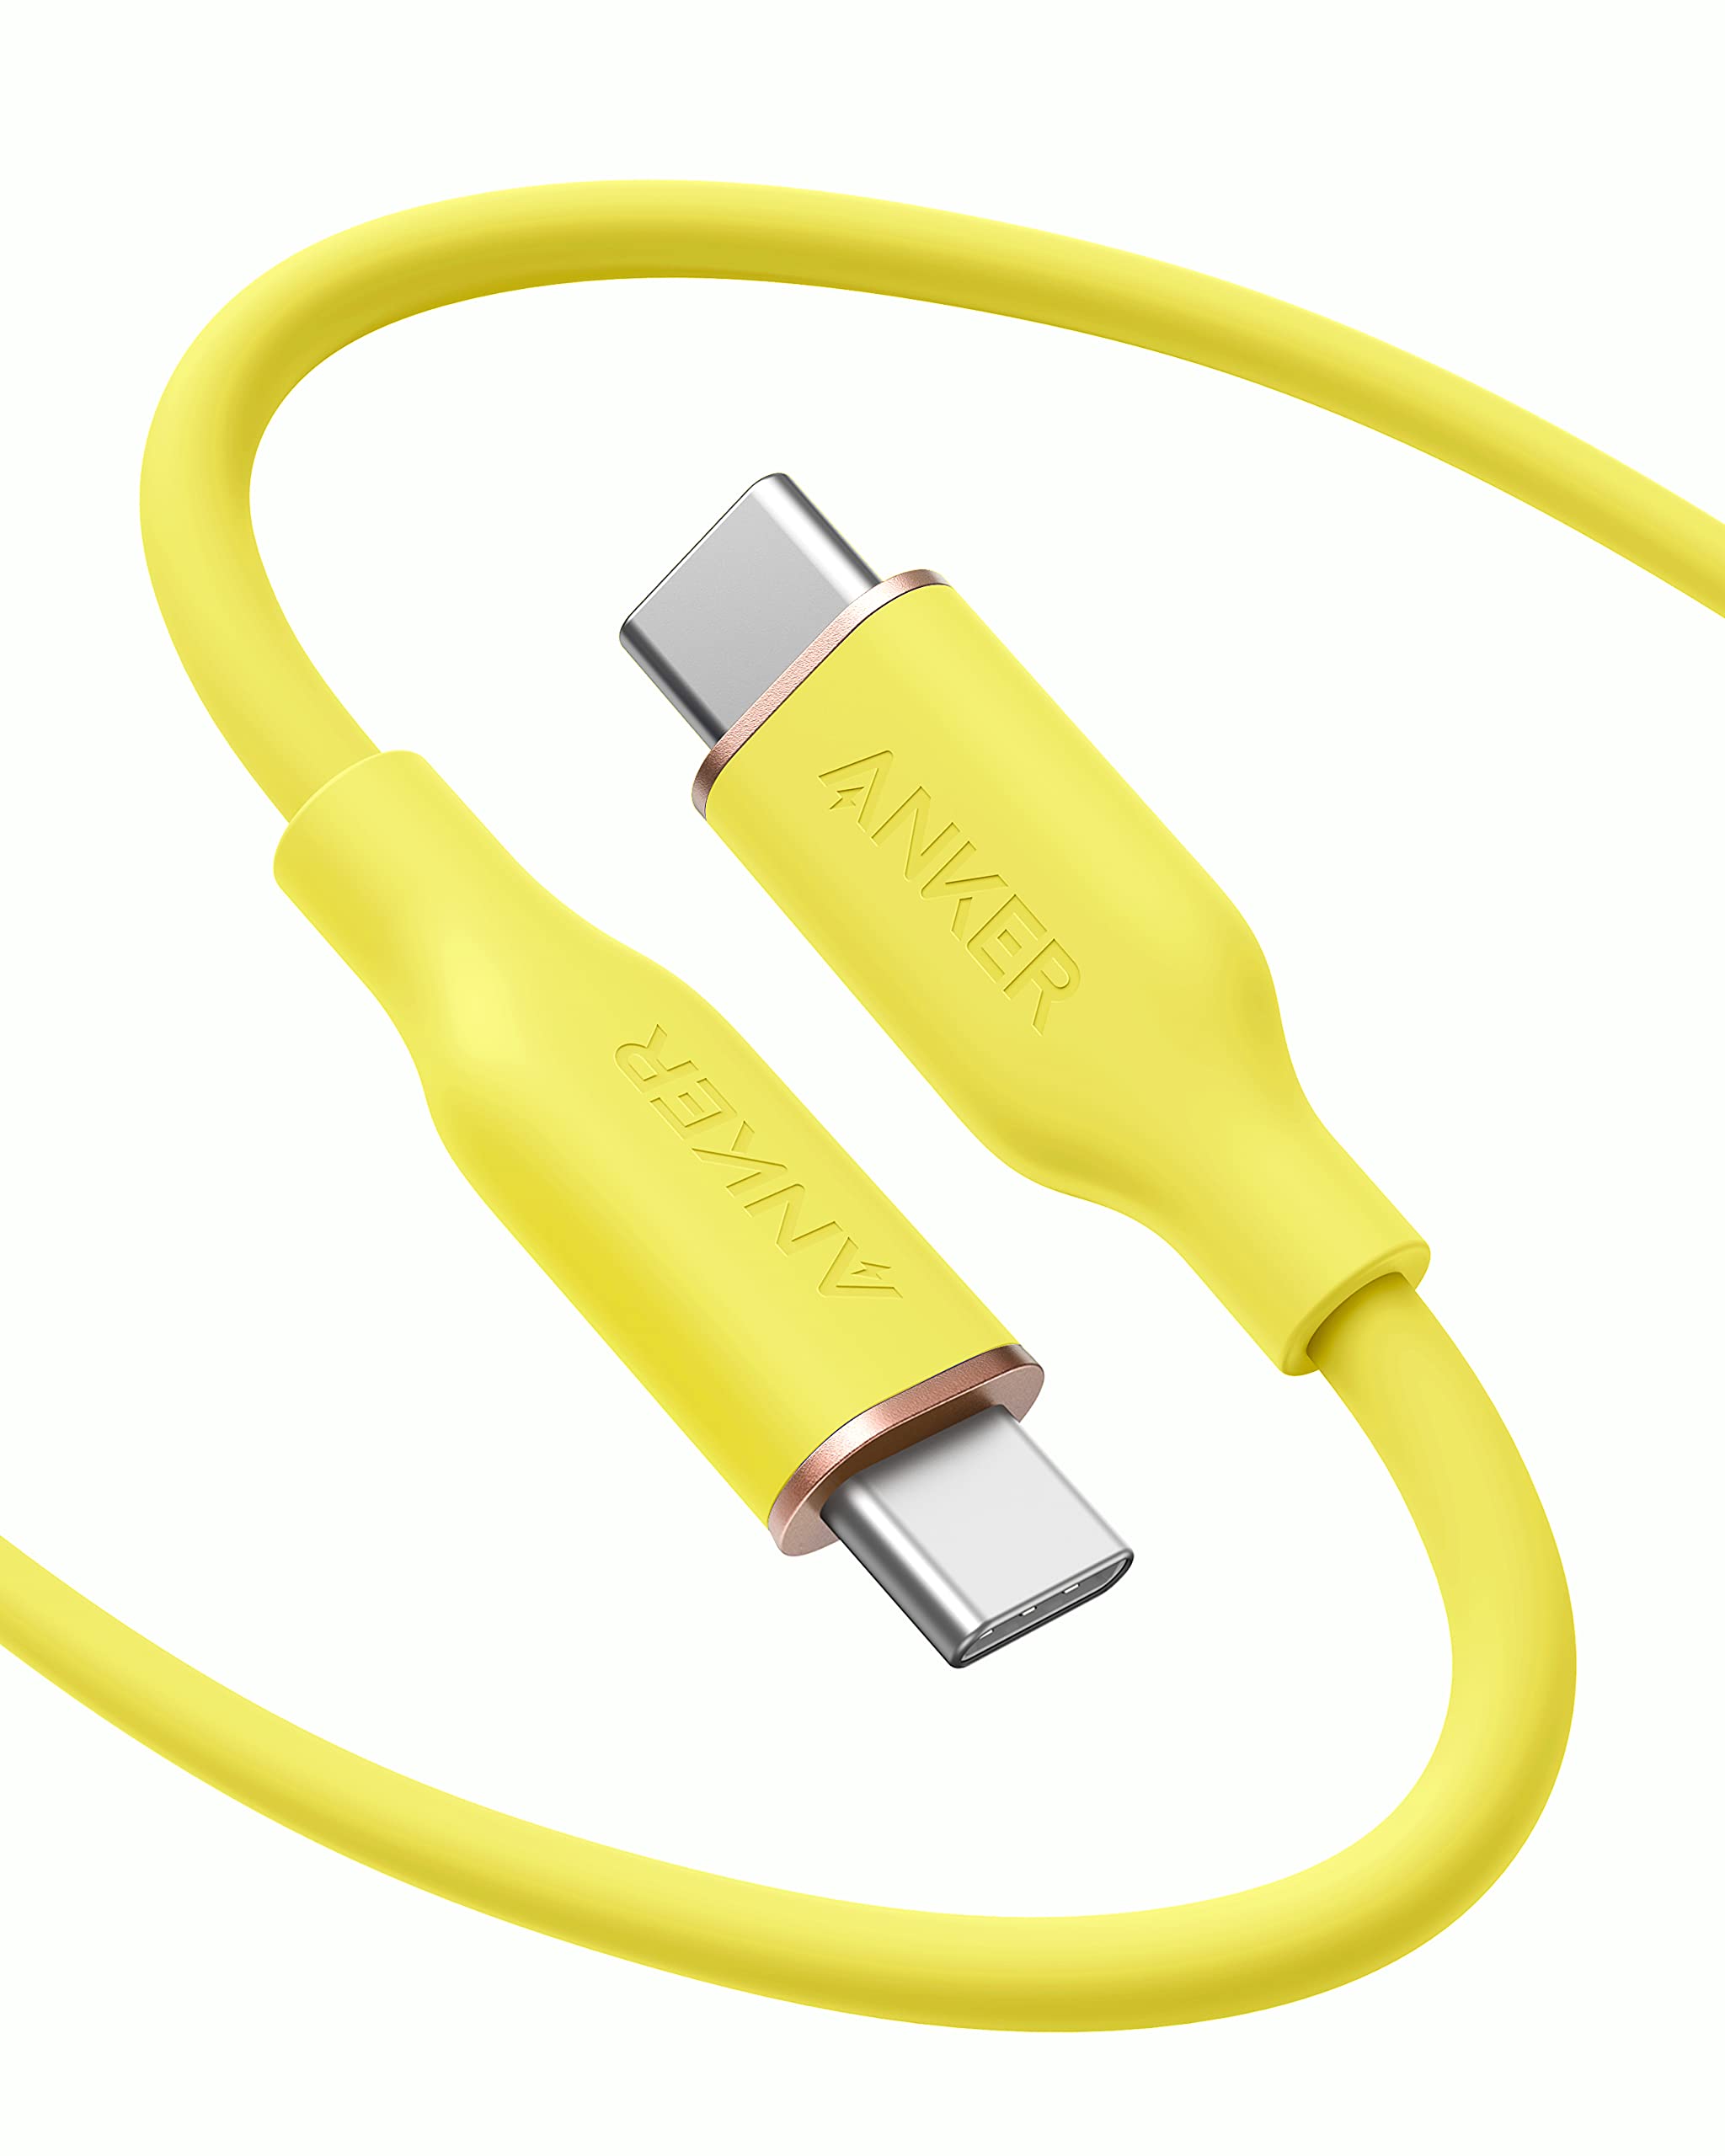 Anker 643 USB-C to USB-C Cable (Flow, Silicone) 6ft / Daffodil Yellow